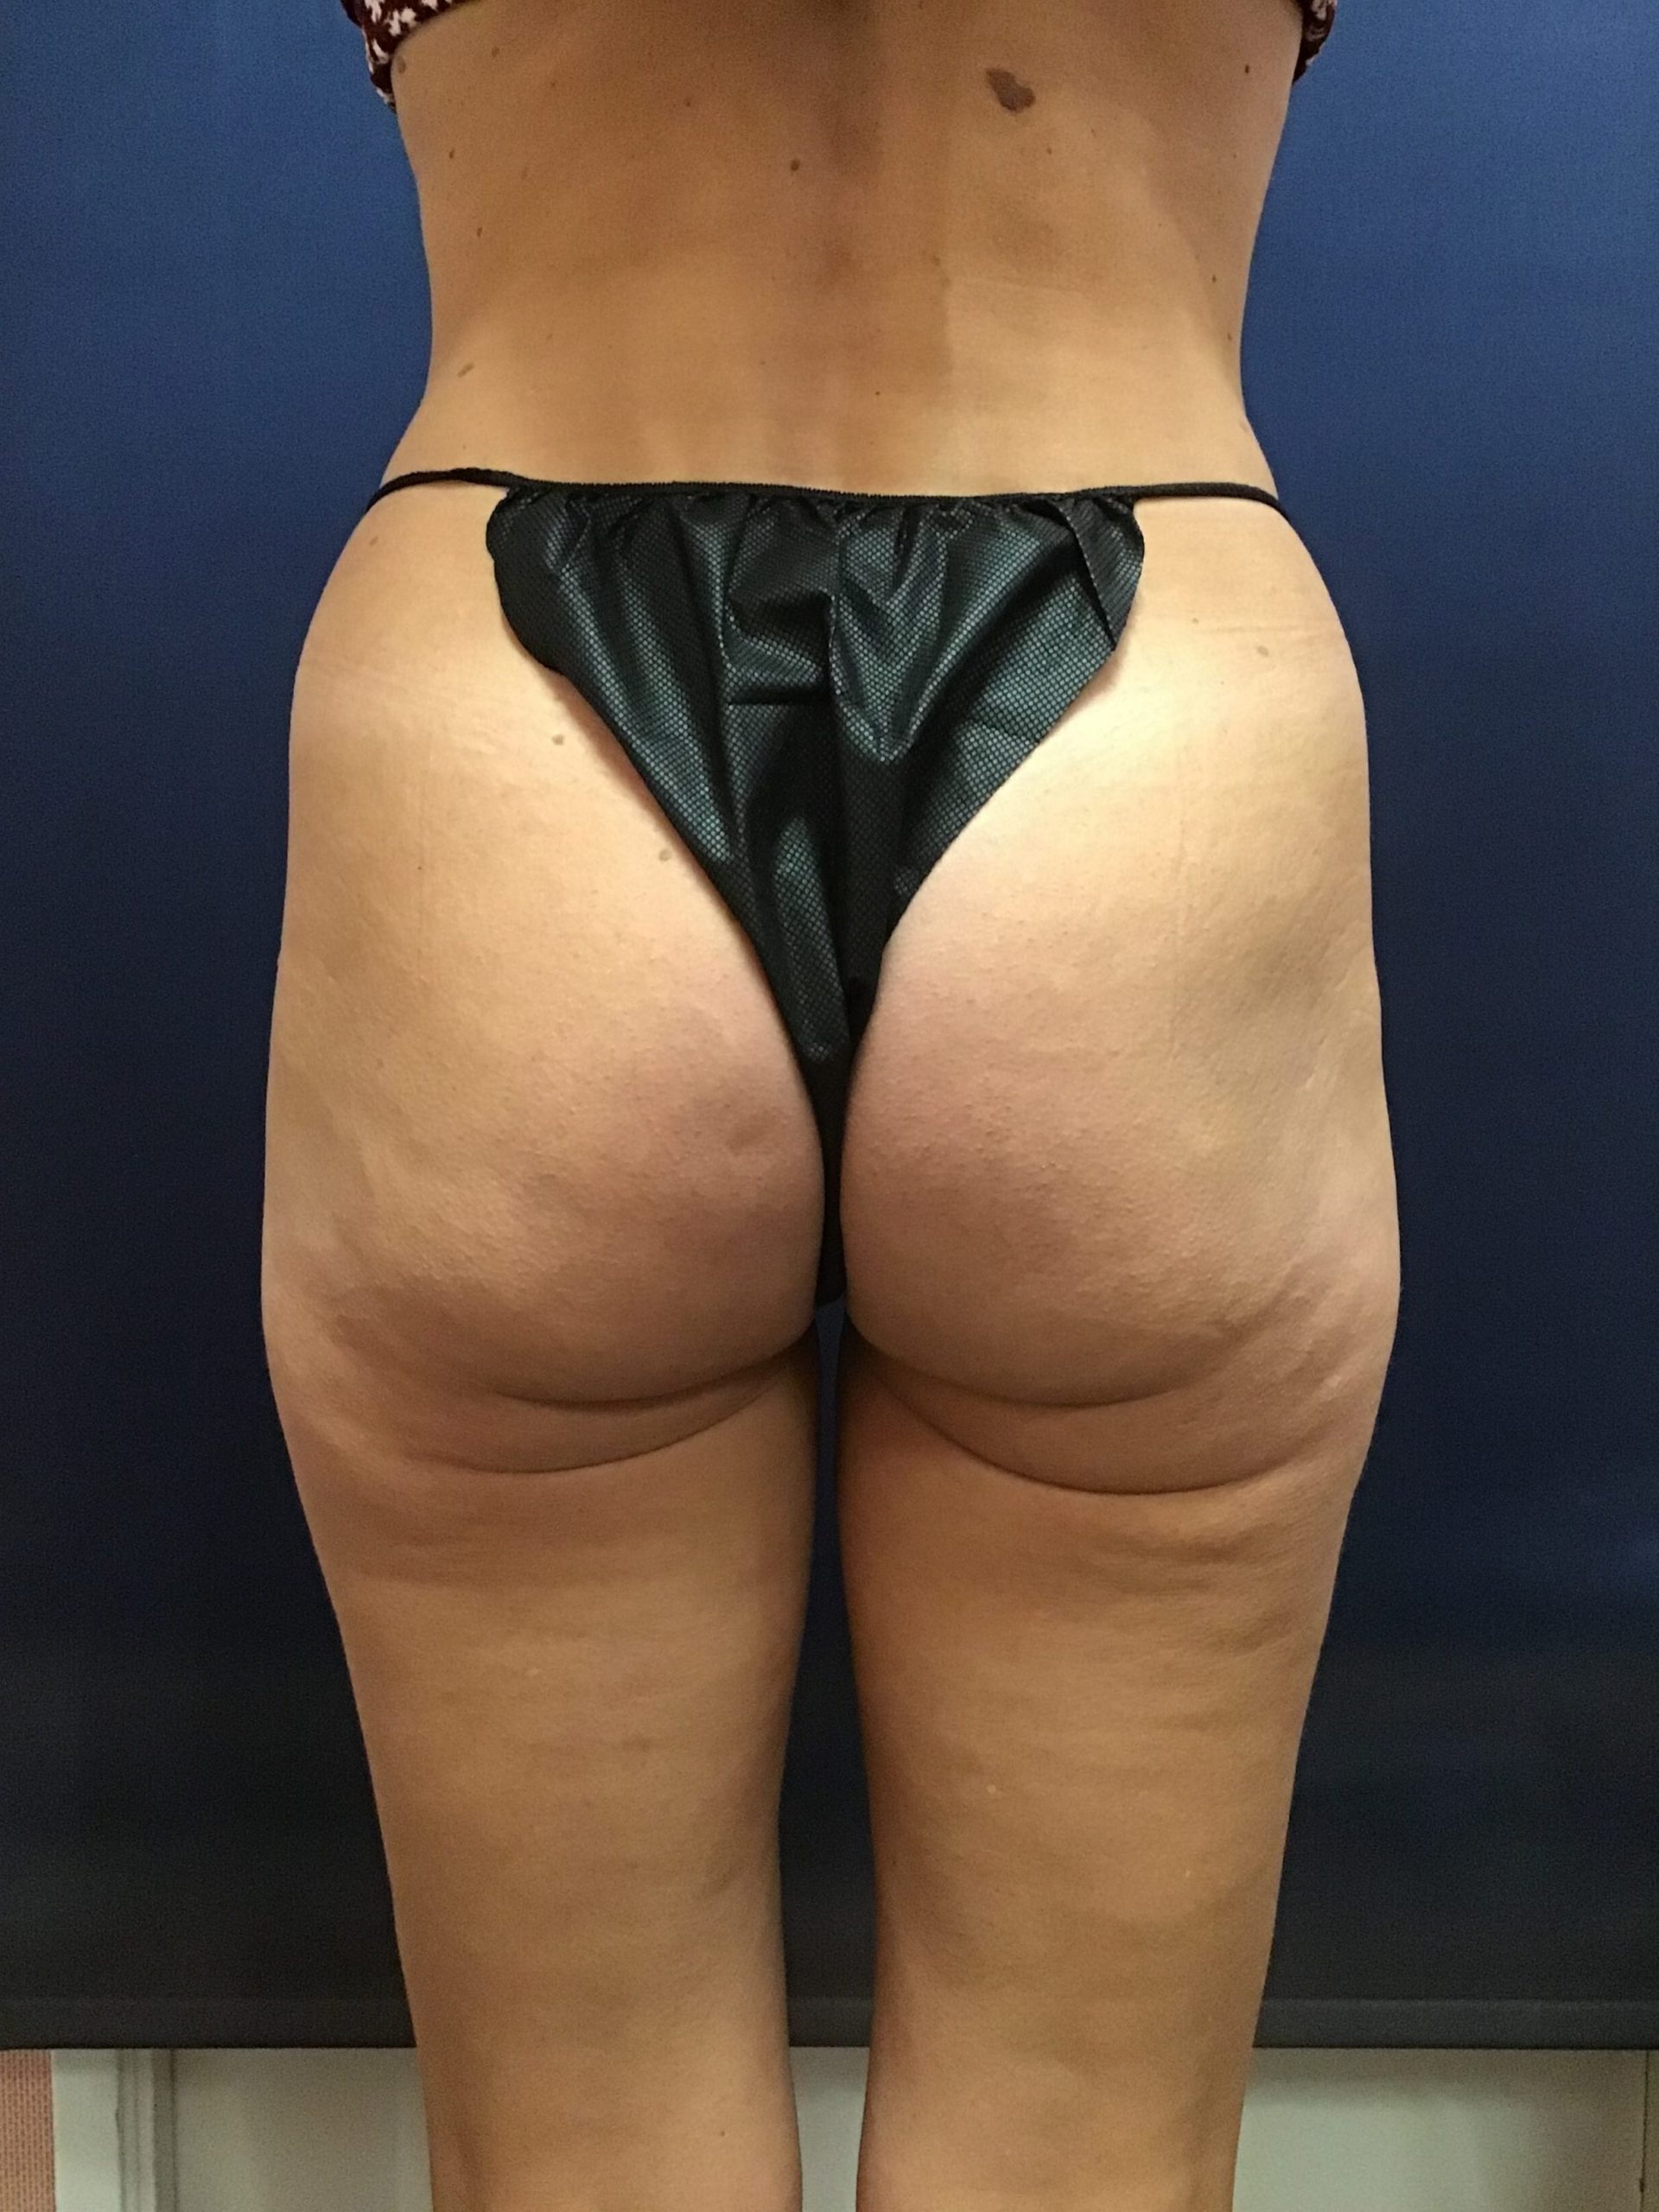 April's butt/back of thighs in January 2022, two months after receiving final QWO treatment at LJC